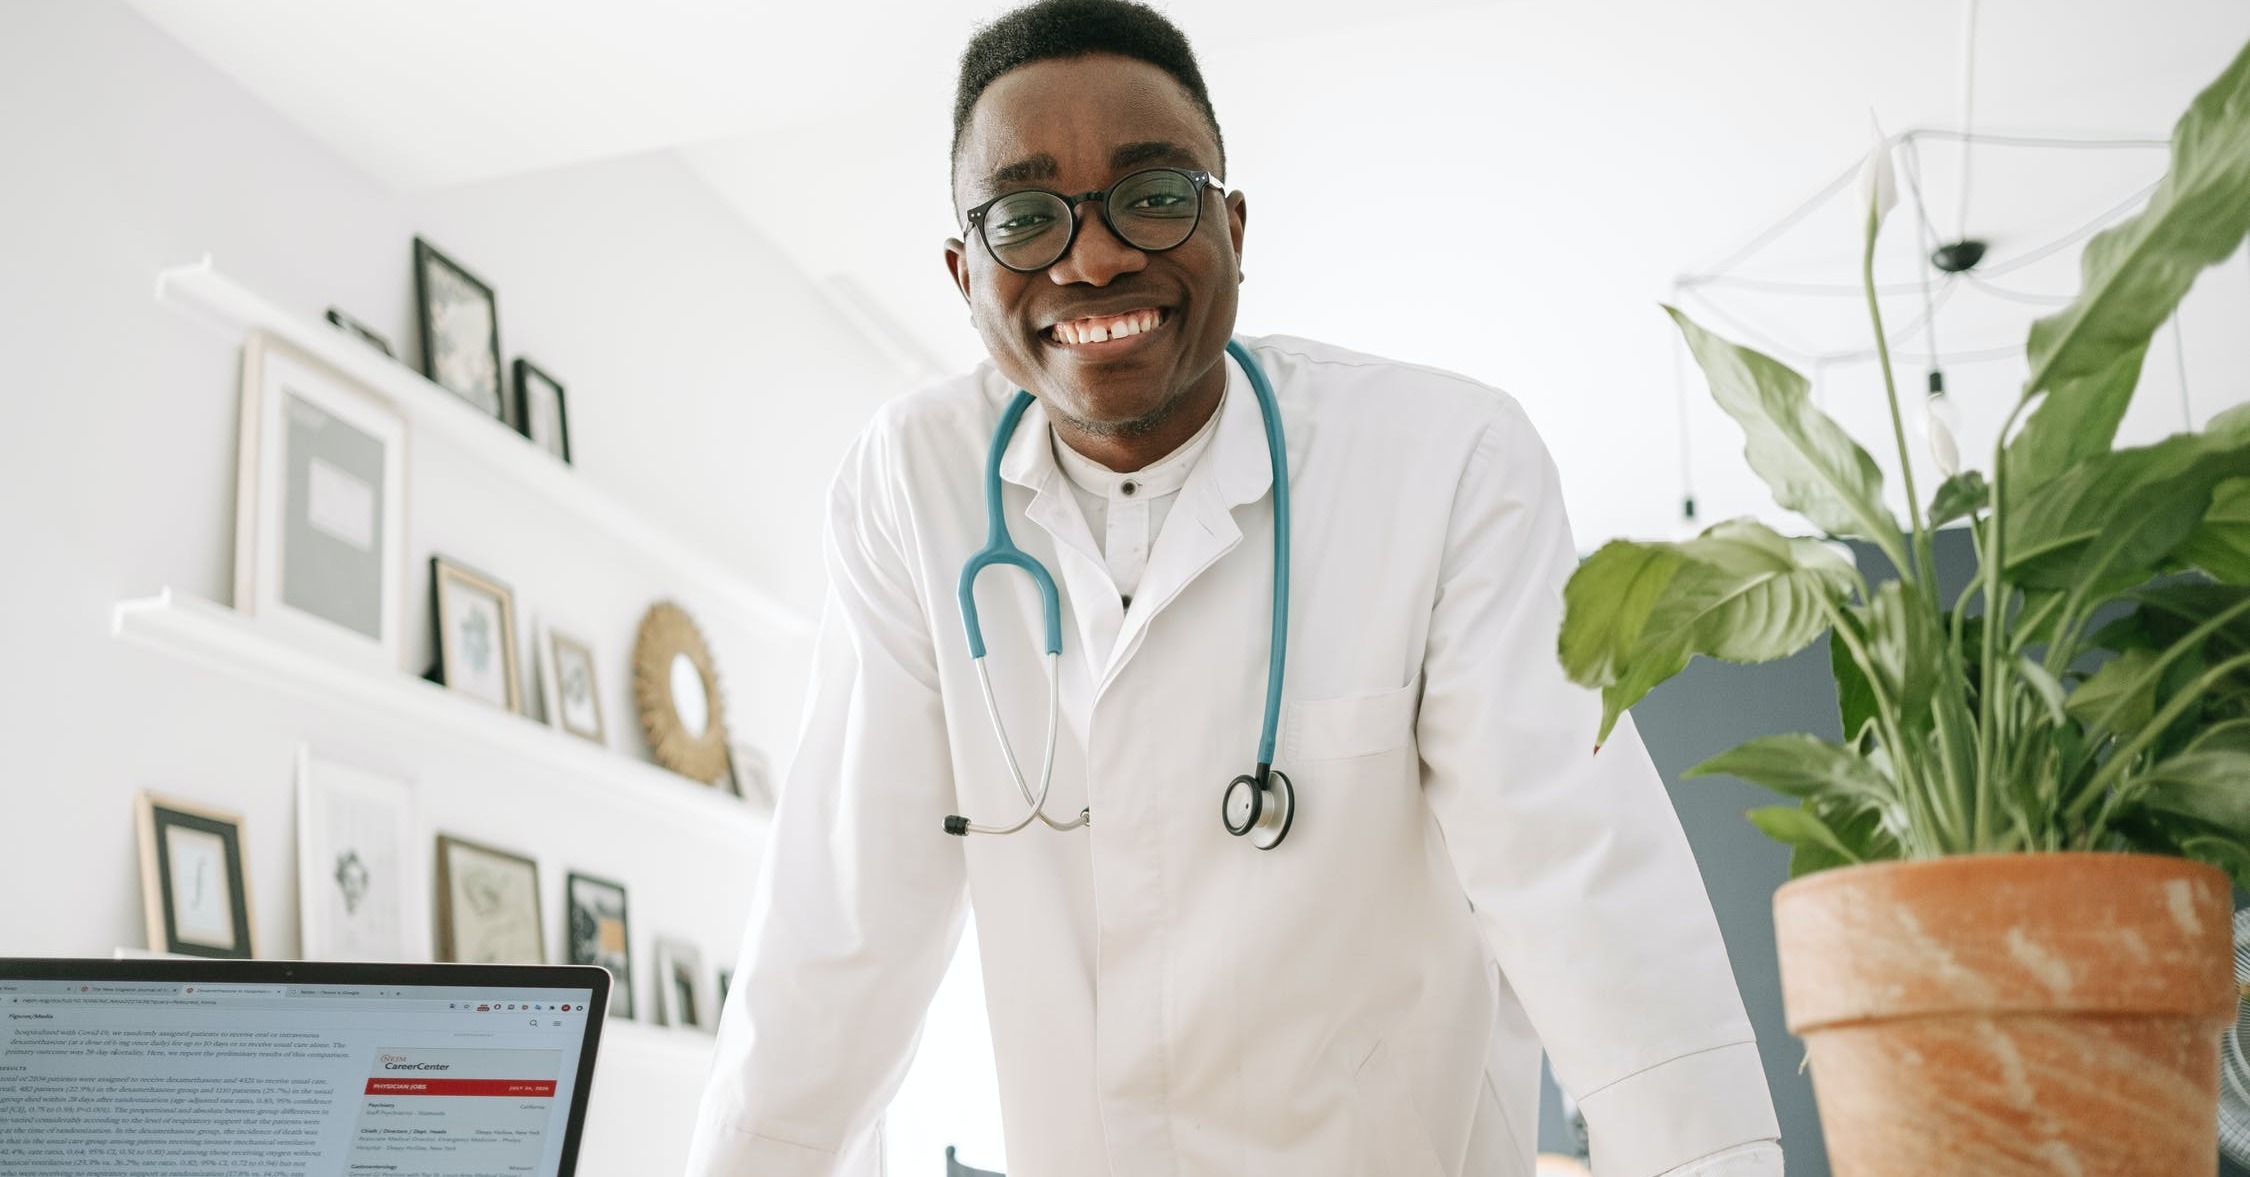 <p>In their second year of study, physician assistant students undertake clinical rotations supervised by preceptors in emergency medicine, pediatrics, internal medicine, and family medicine.</p>